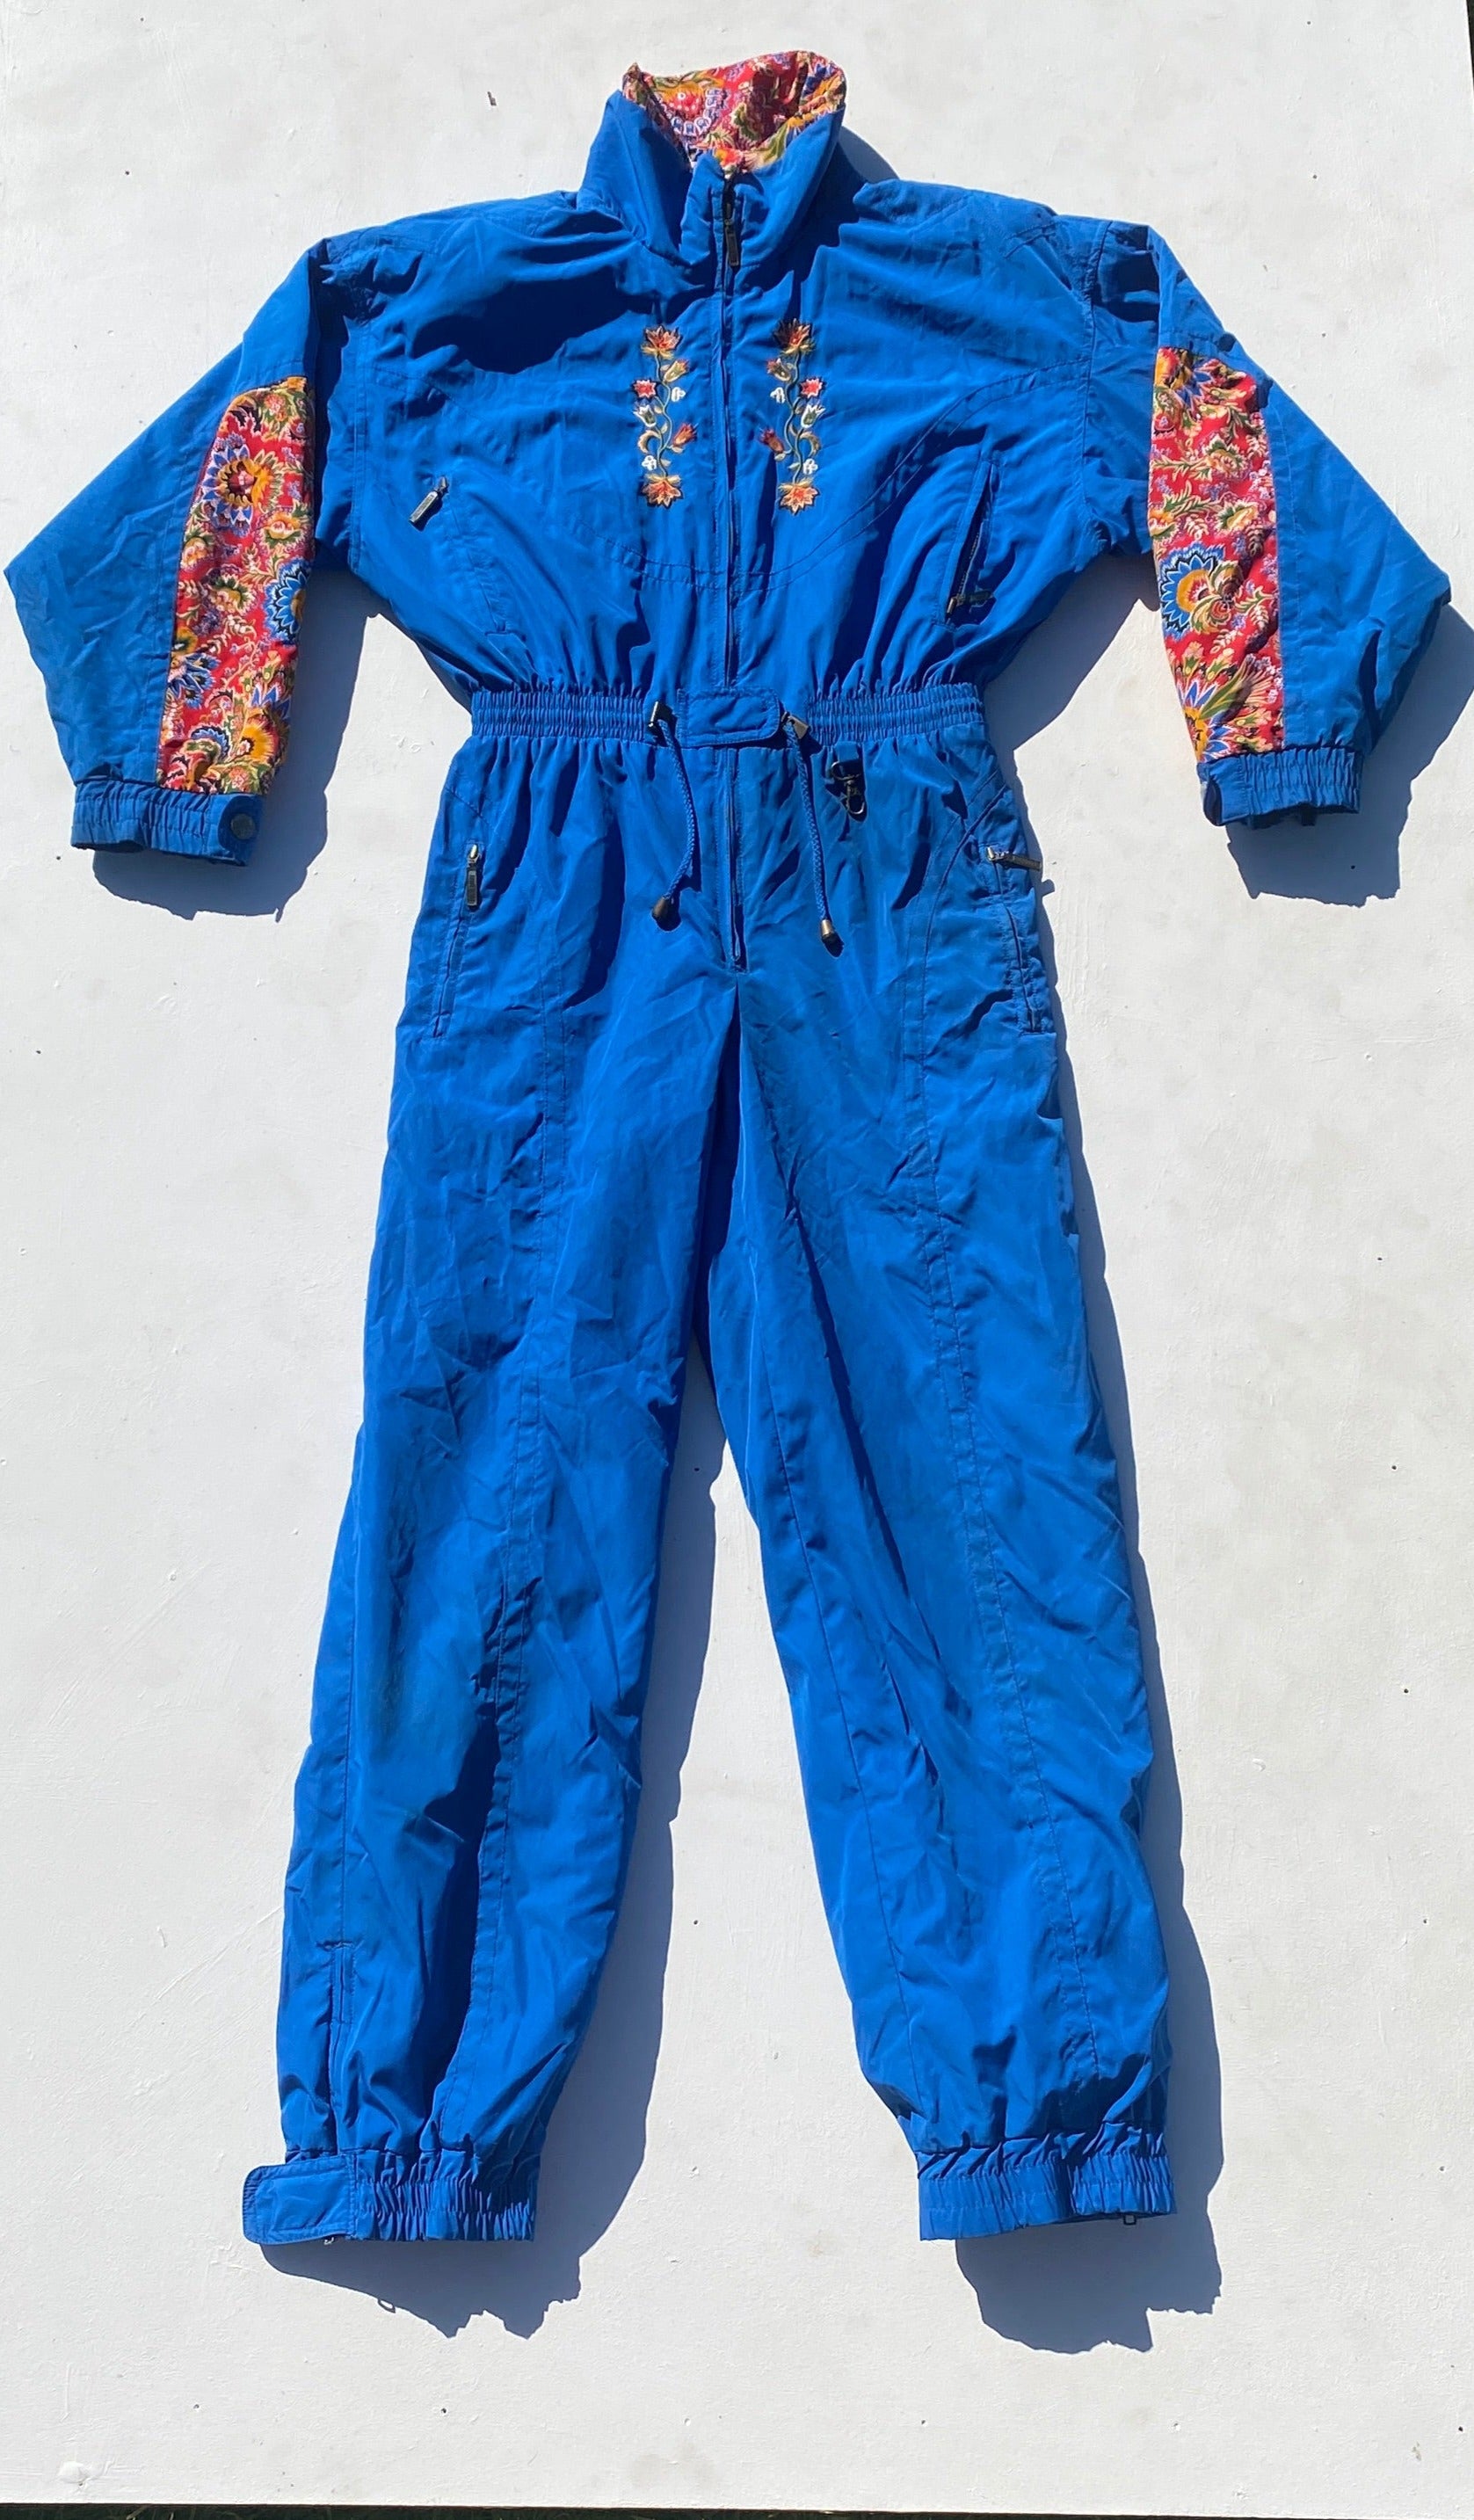 Powderhorn royal blue embroidered one piece ski suit with red, yellow, green and blue patterned floral fabric patches, with drawstring waist. Front view flat lay arms bent